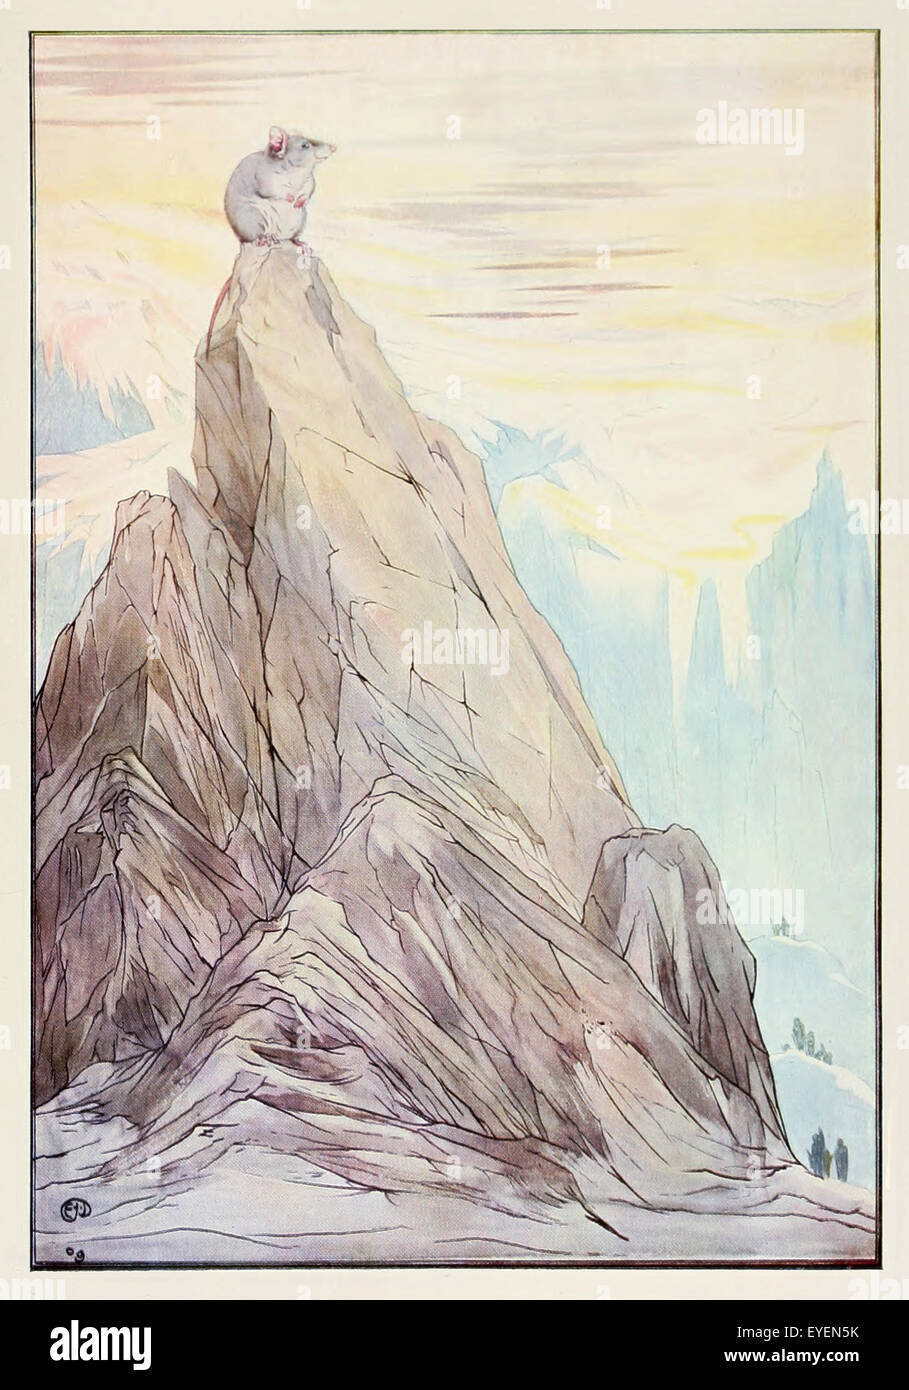 'The Mountain in Labour'  fable by Aesop (circa 600BC). A Mountain emitting terrible noises was said to be in labor. But, as people watched to see what would happen, all they saw come out of it was a mouse. Don’t make a big fuss over nothing. Illustration by Edward J. Detmold (1883-1957). See description for more information. Stock Photo